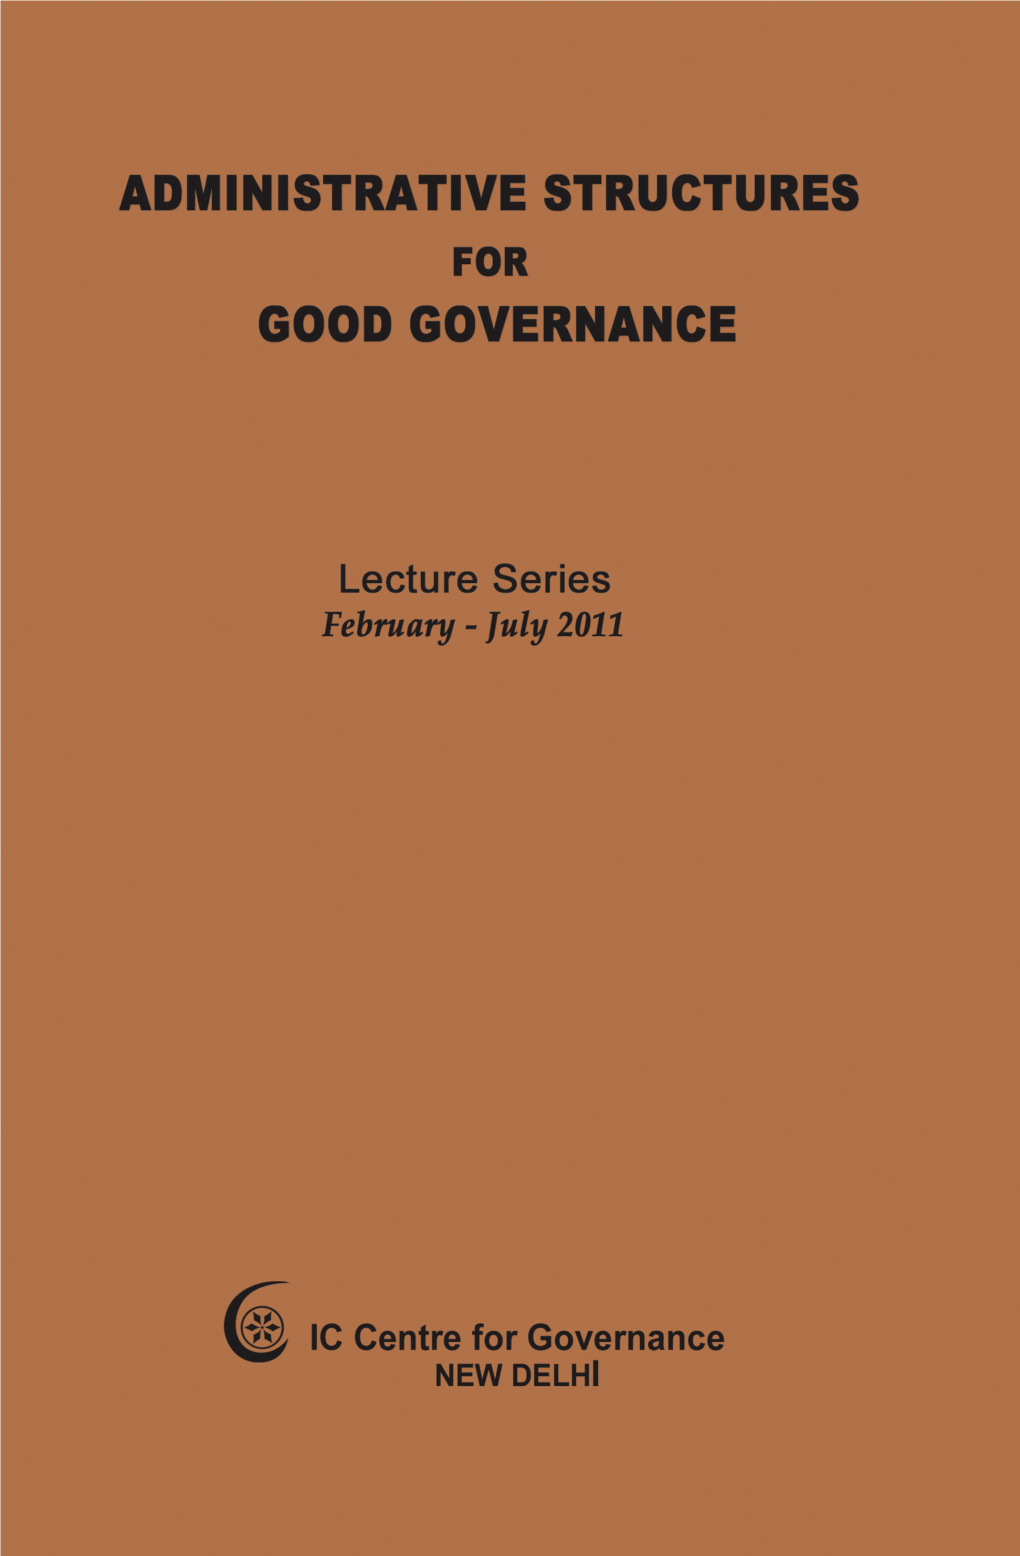 Administrative Structures for Good Governance”